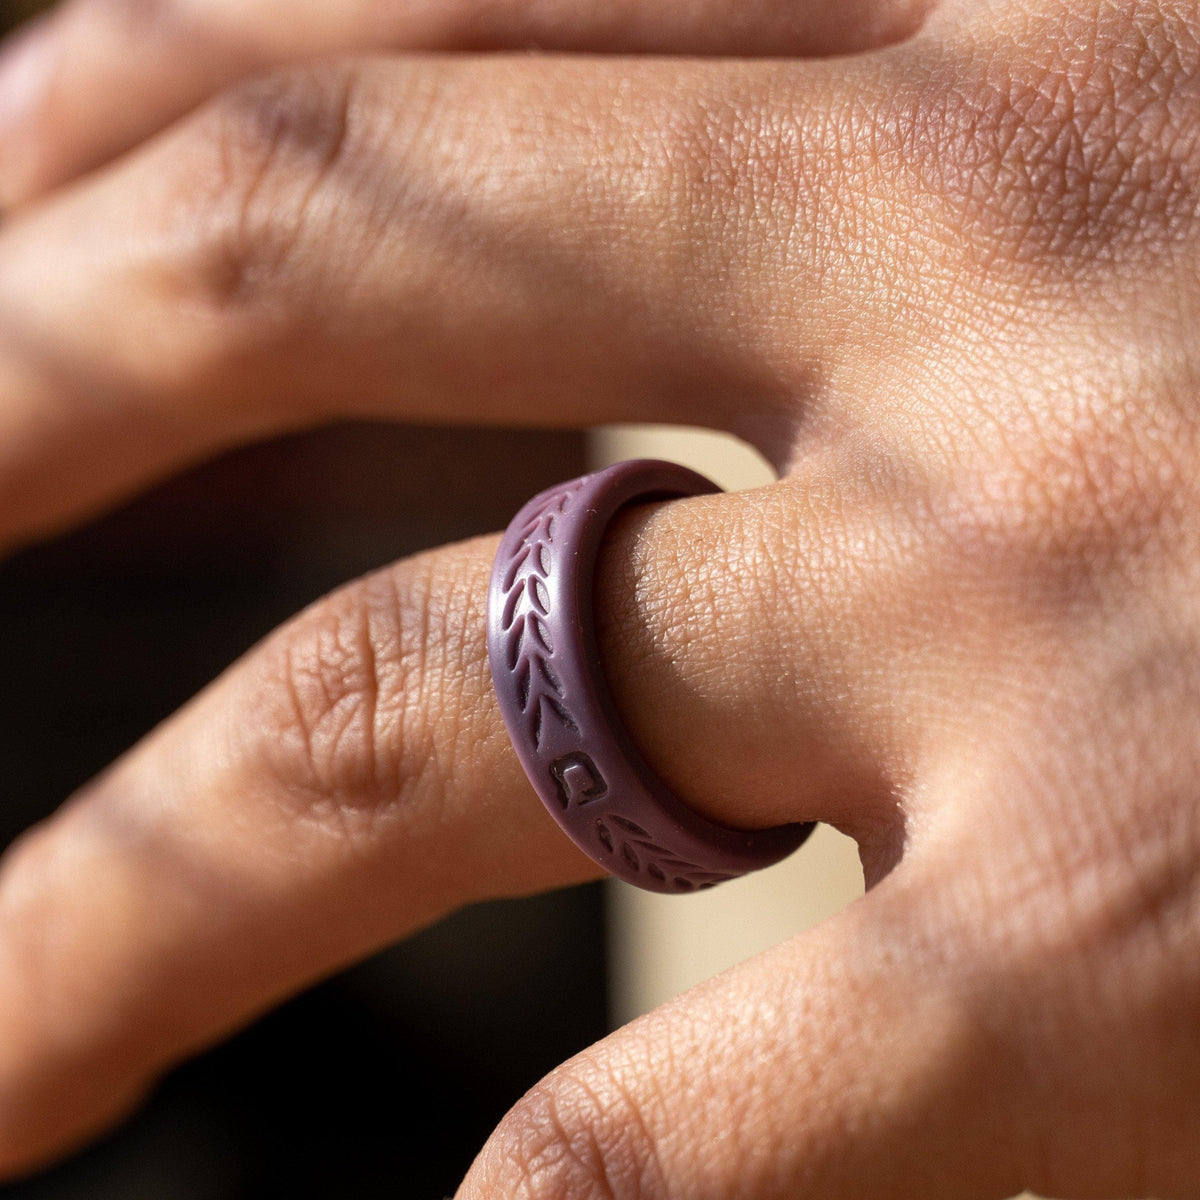 Personal Trainer wearing purple Qalo ring while working out